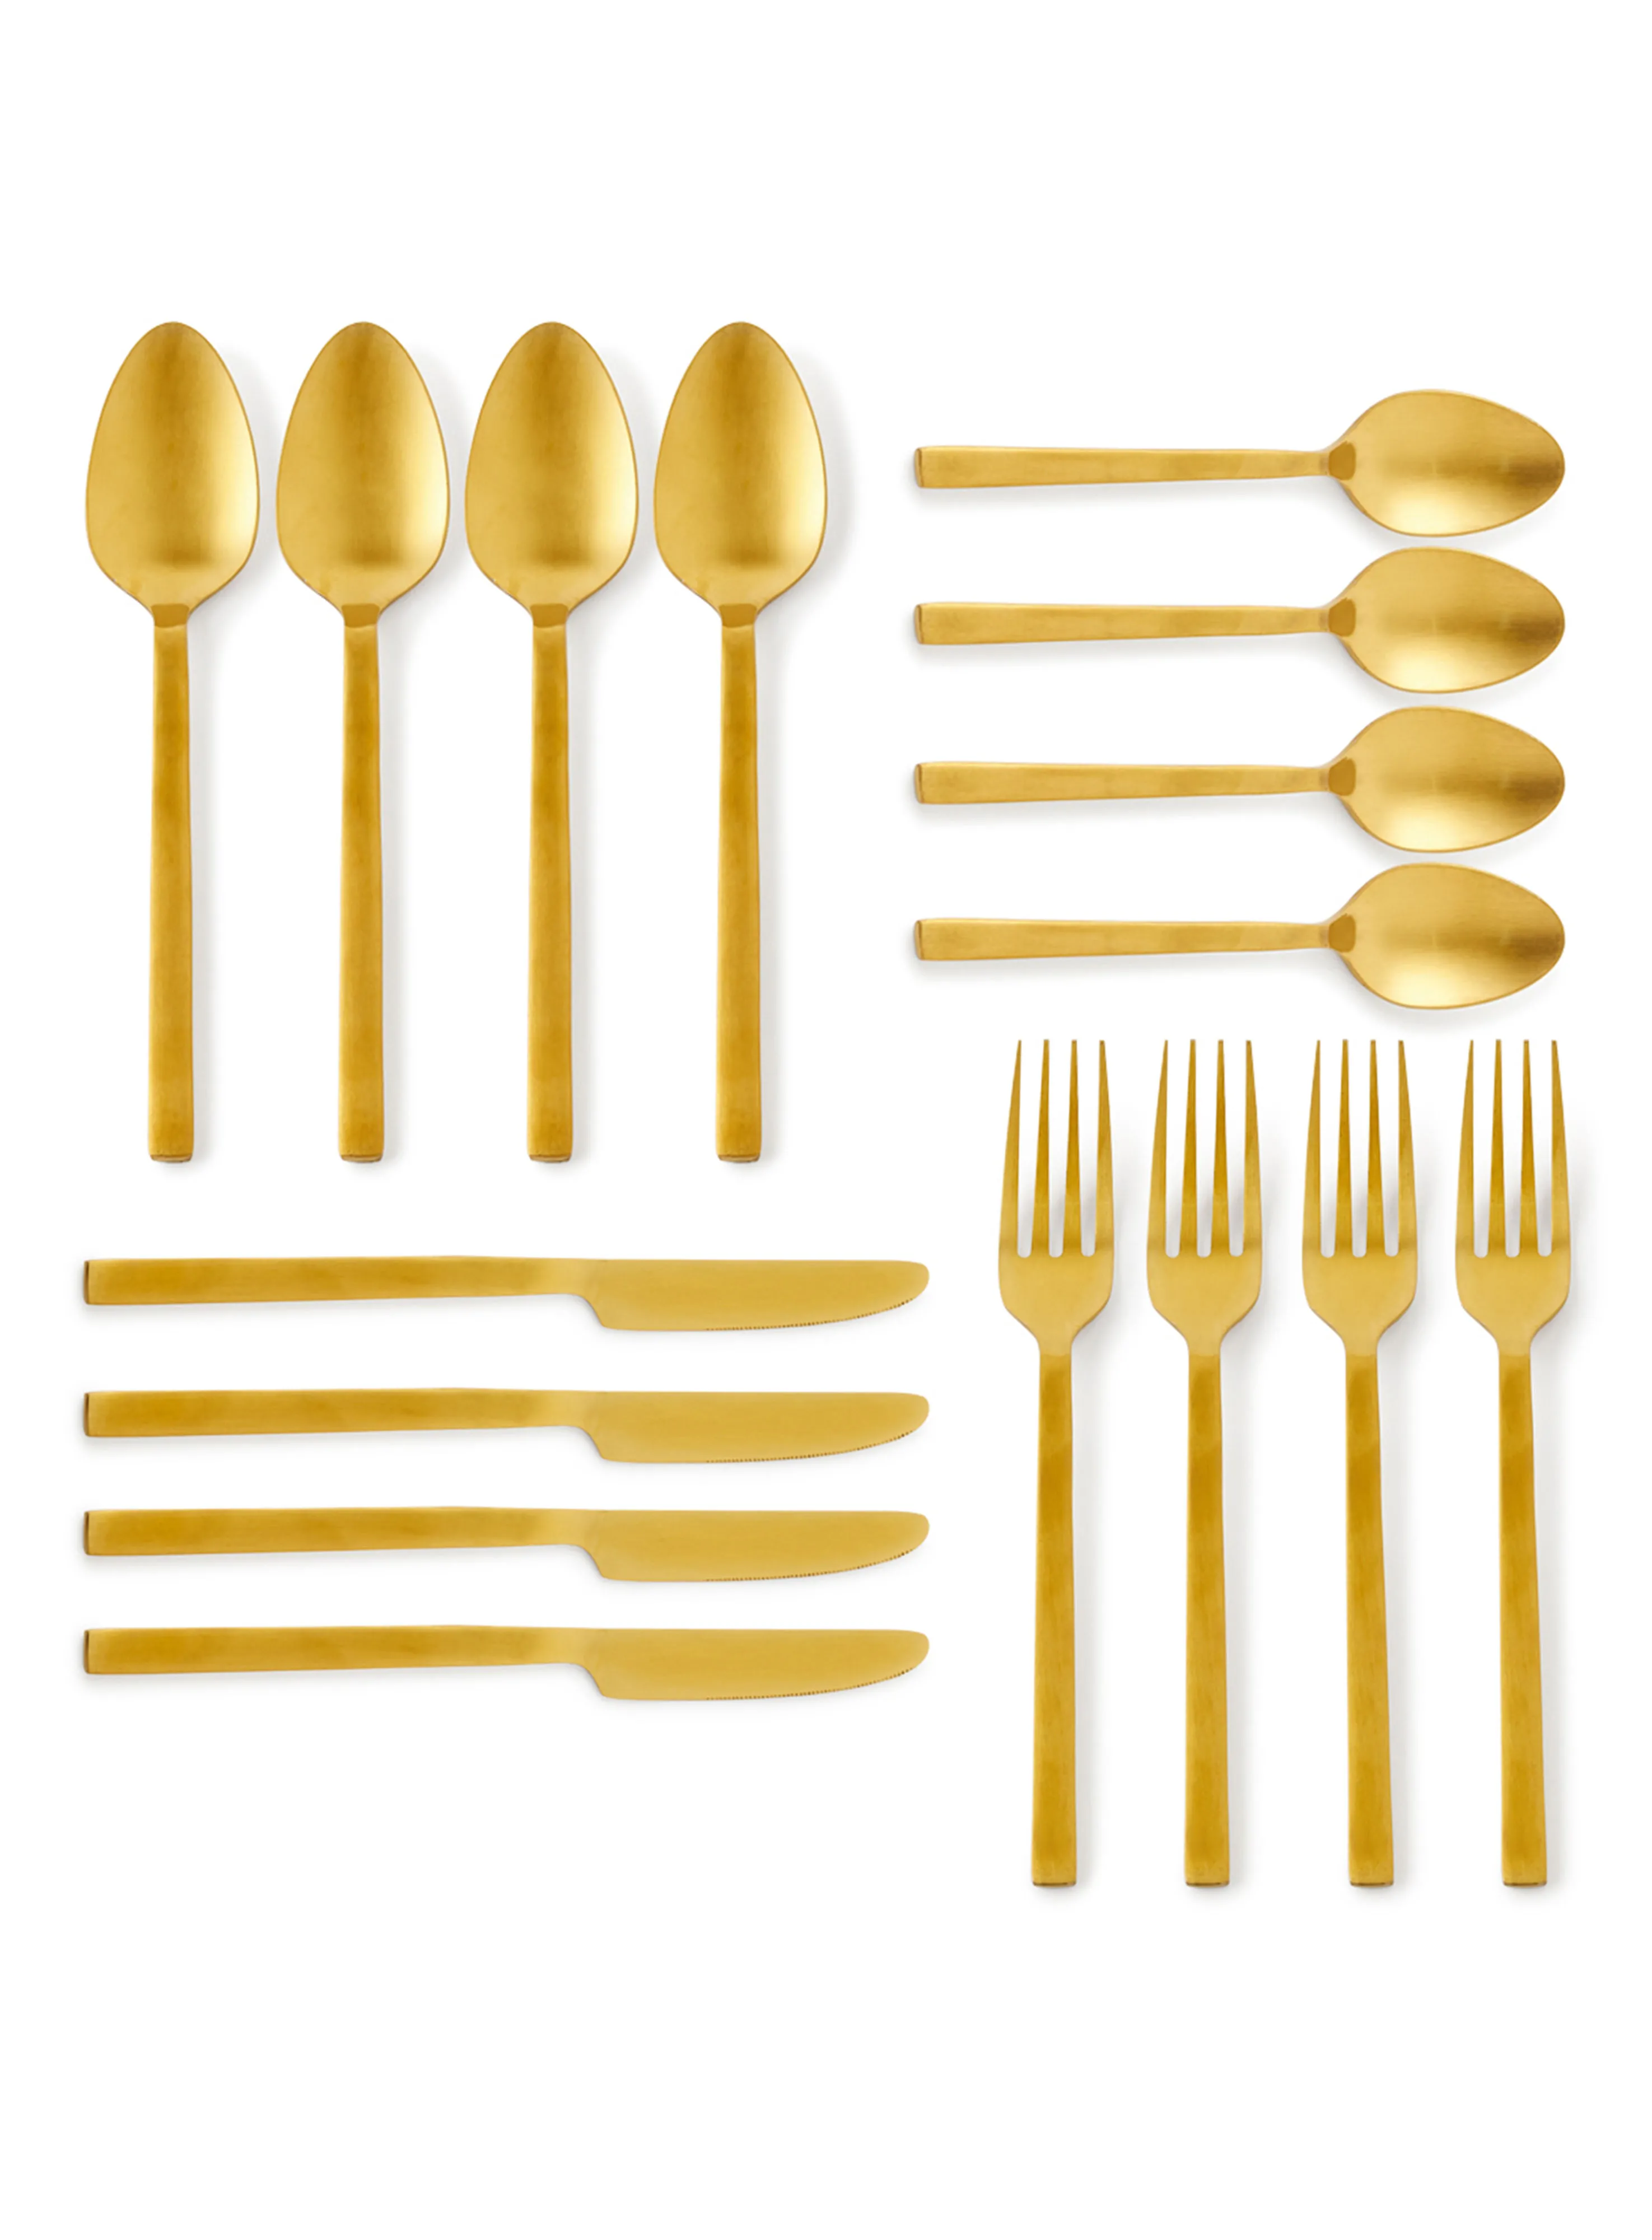 noon east 16 Piece Cutlery Set - Made Of Stainless Steel - Silverware Flatware - Spoons And Forks Set, Spoon Set - Table Spoons, Tea Spoons, Forks, Knives - Serves 4 - Design Gold Lyra